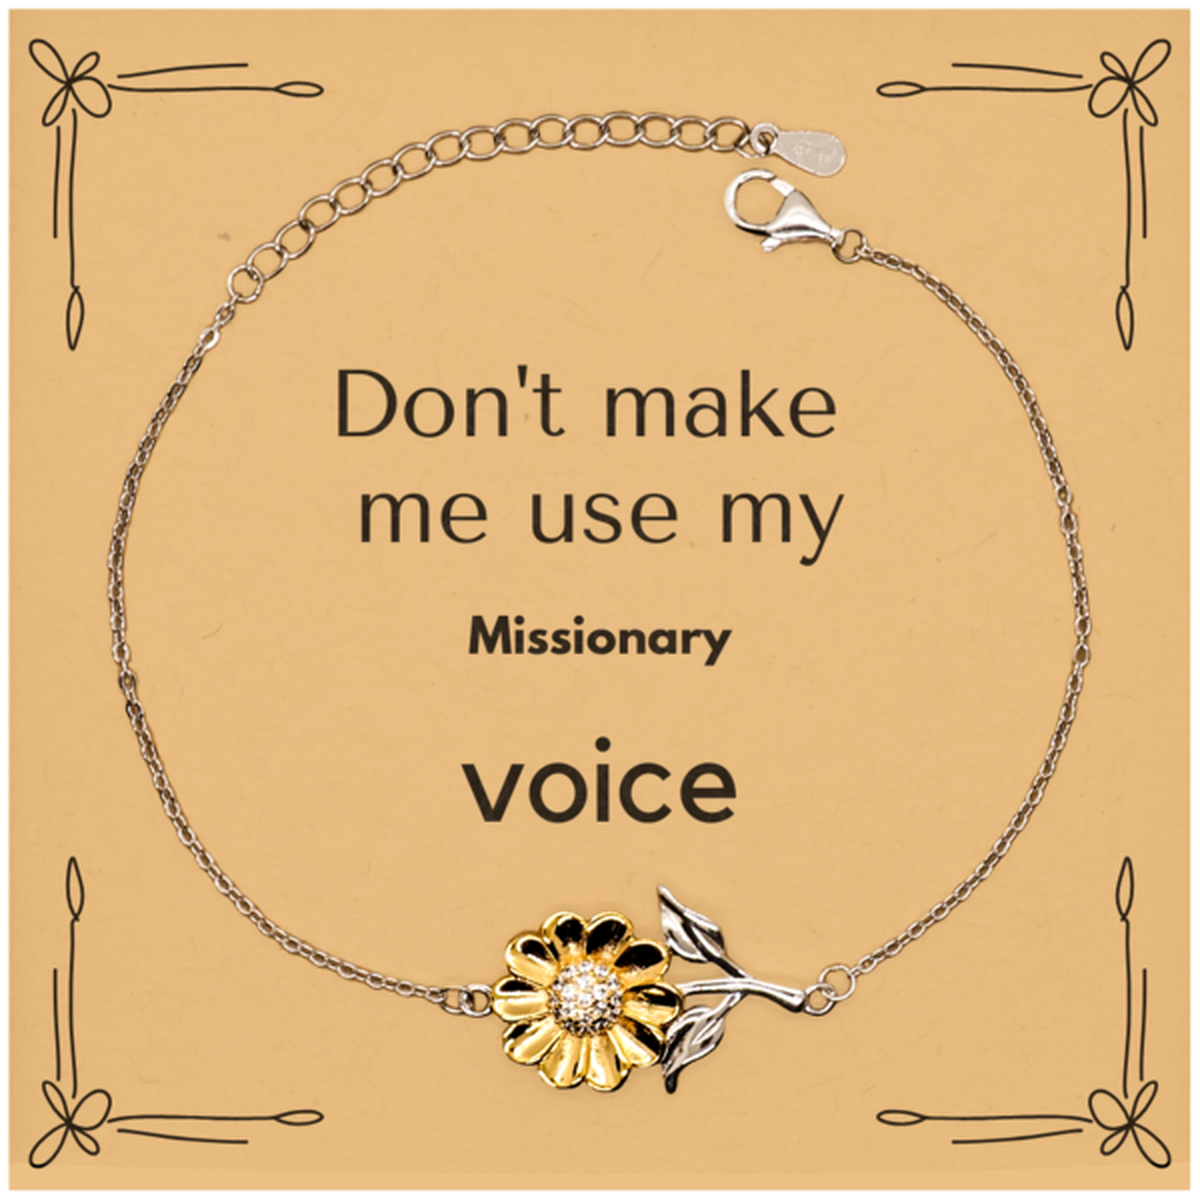 Don't make me use my Missionary voice, Sarcasm Missionary Card Gifts, Christmas Missionary Sunflower Bracelet Birthday Unique Gifts For Missionary Coworkers, Men, Women, Colleague, Friends